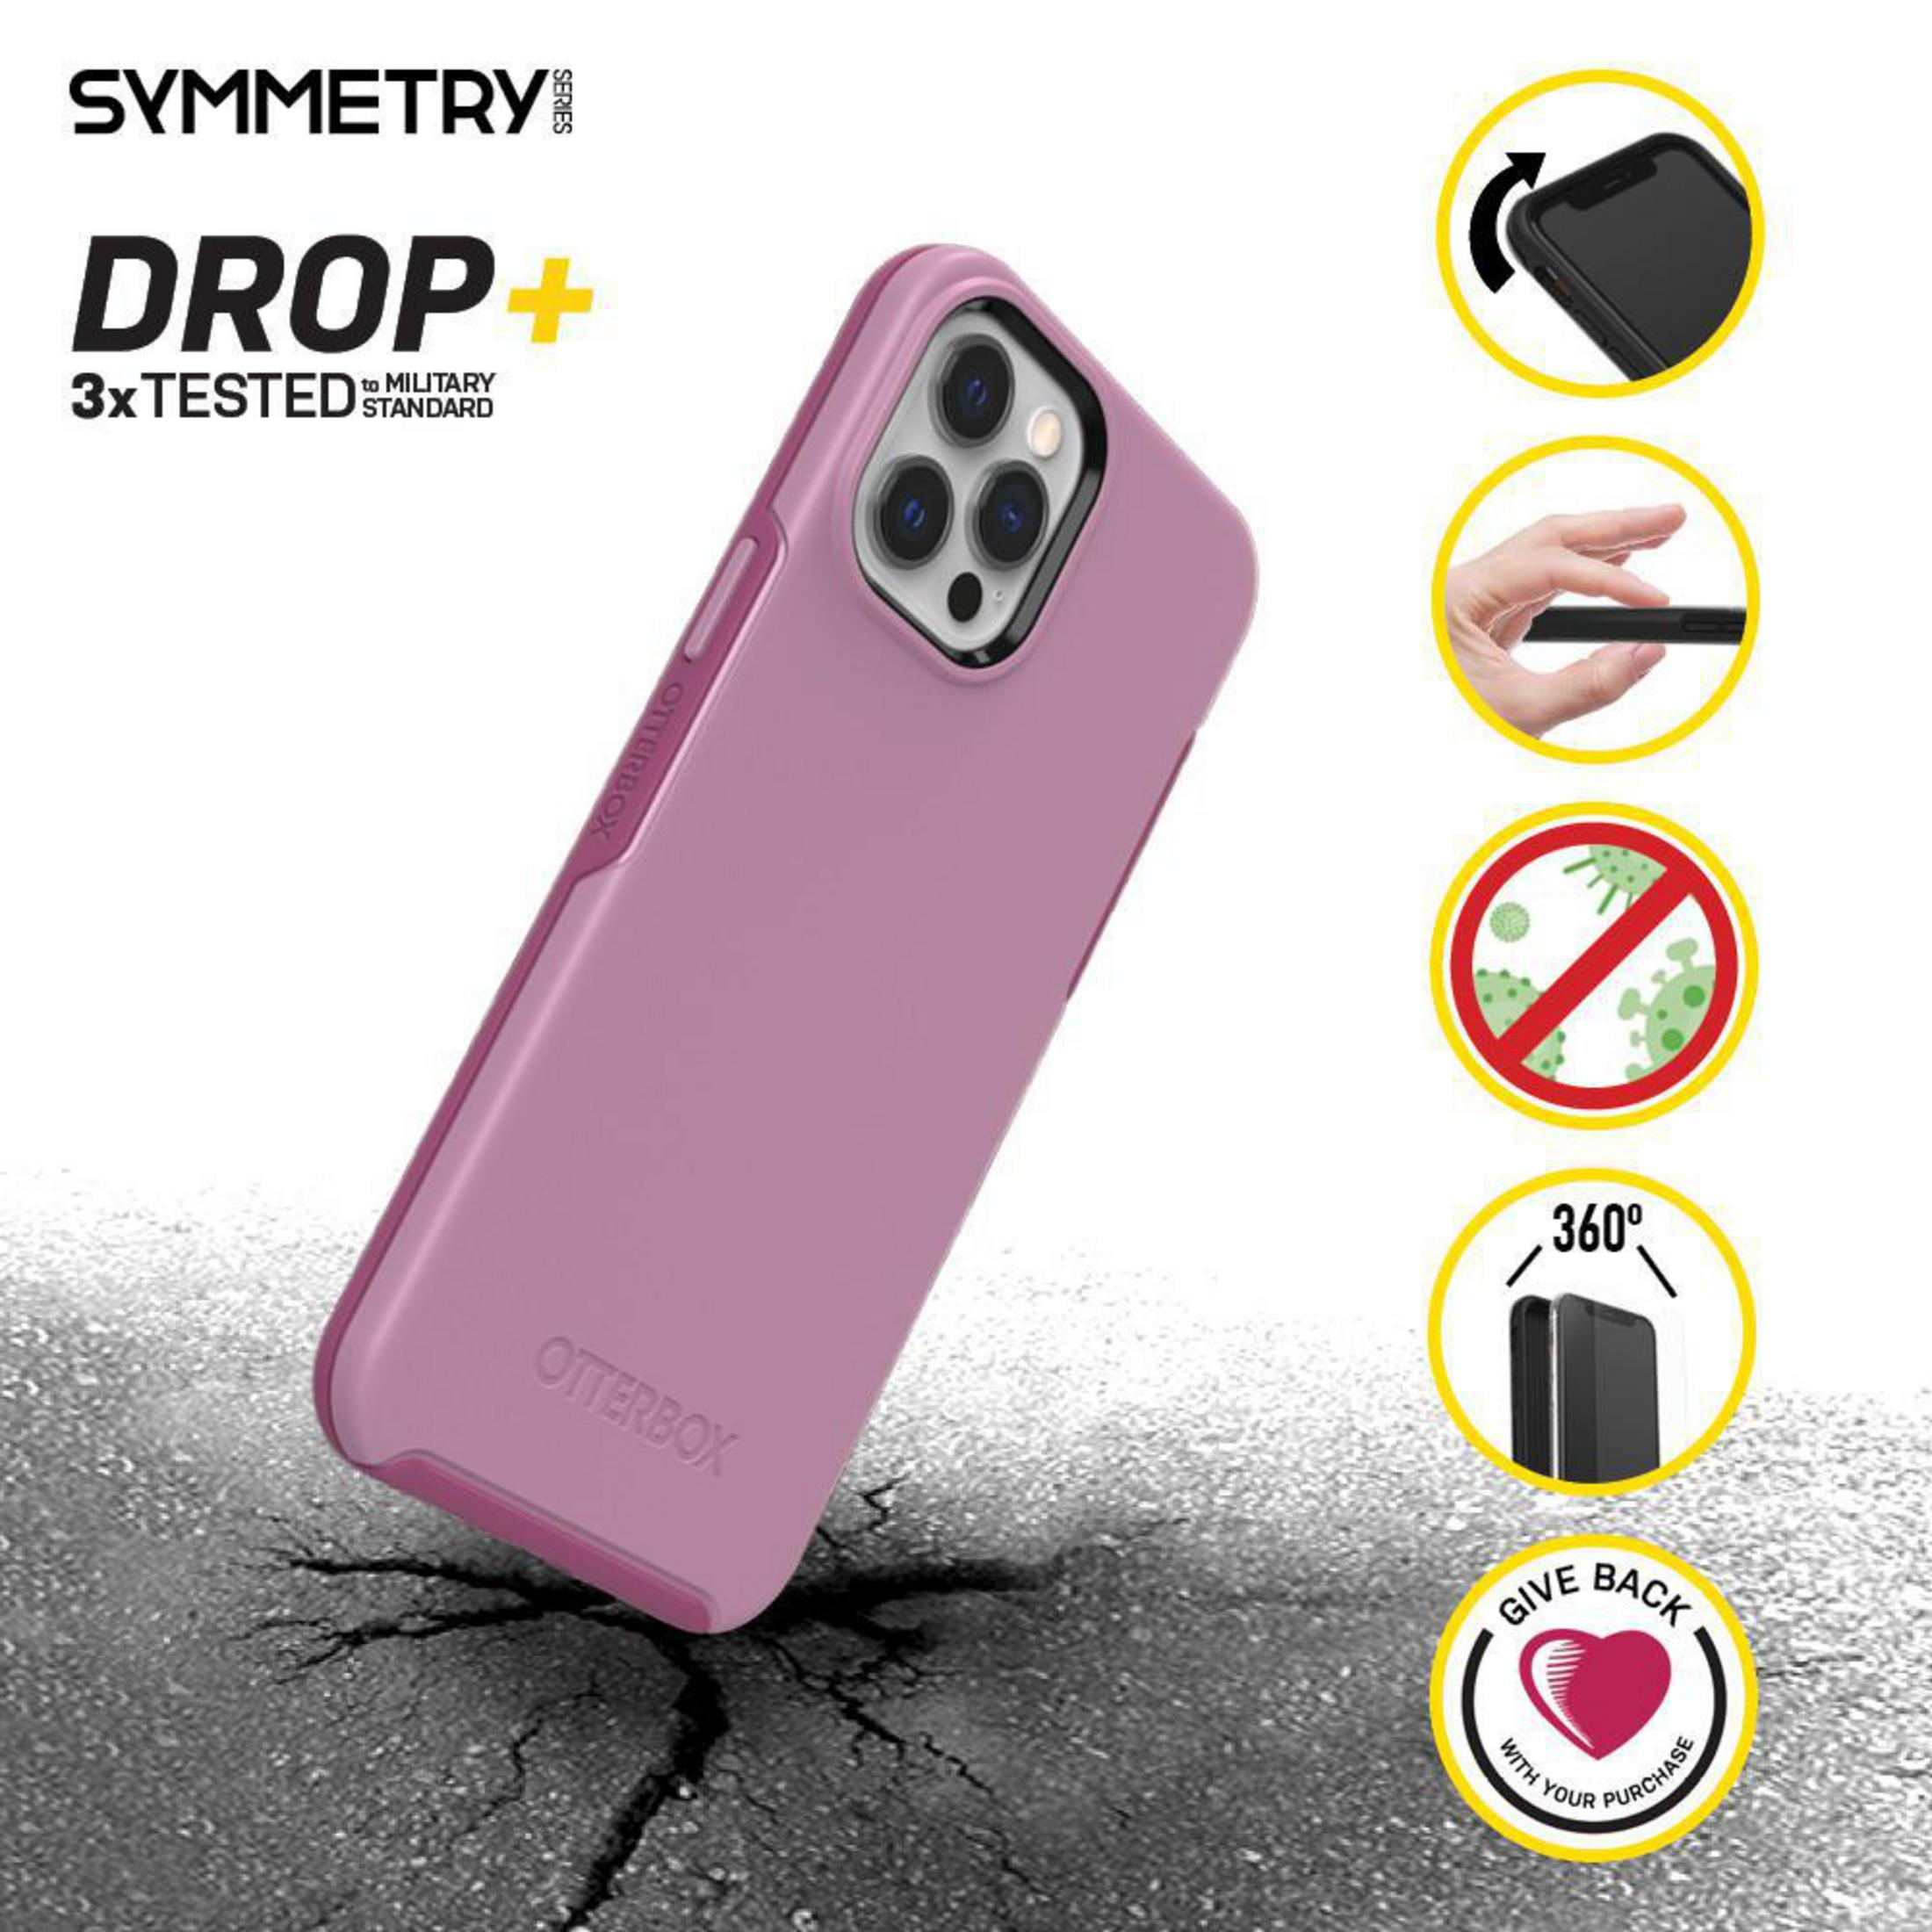 OTTERBOX 77-65464 SYMMETRY Pro PINK, 12 POP CAKE 12 iPhone Apple, Backcover, MAX Max, PRO IP Pink